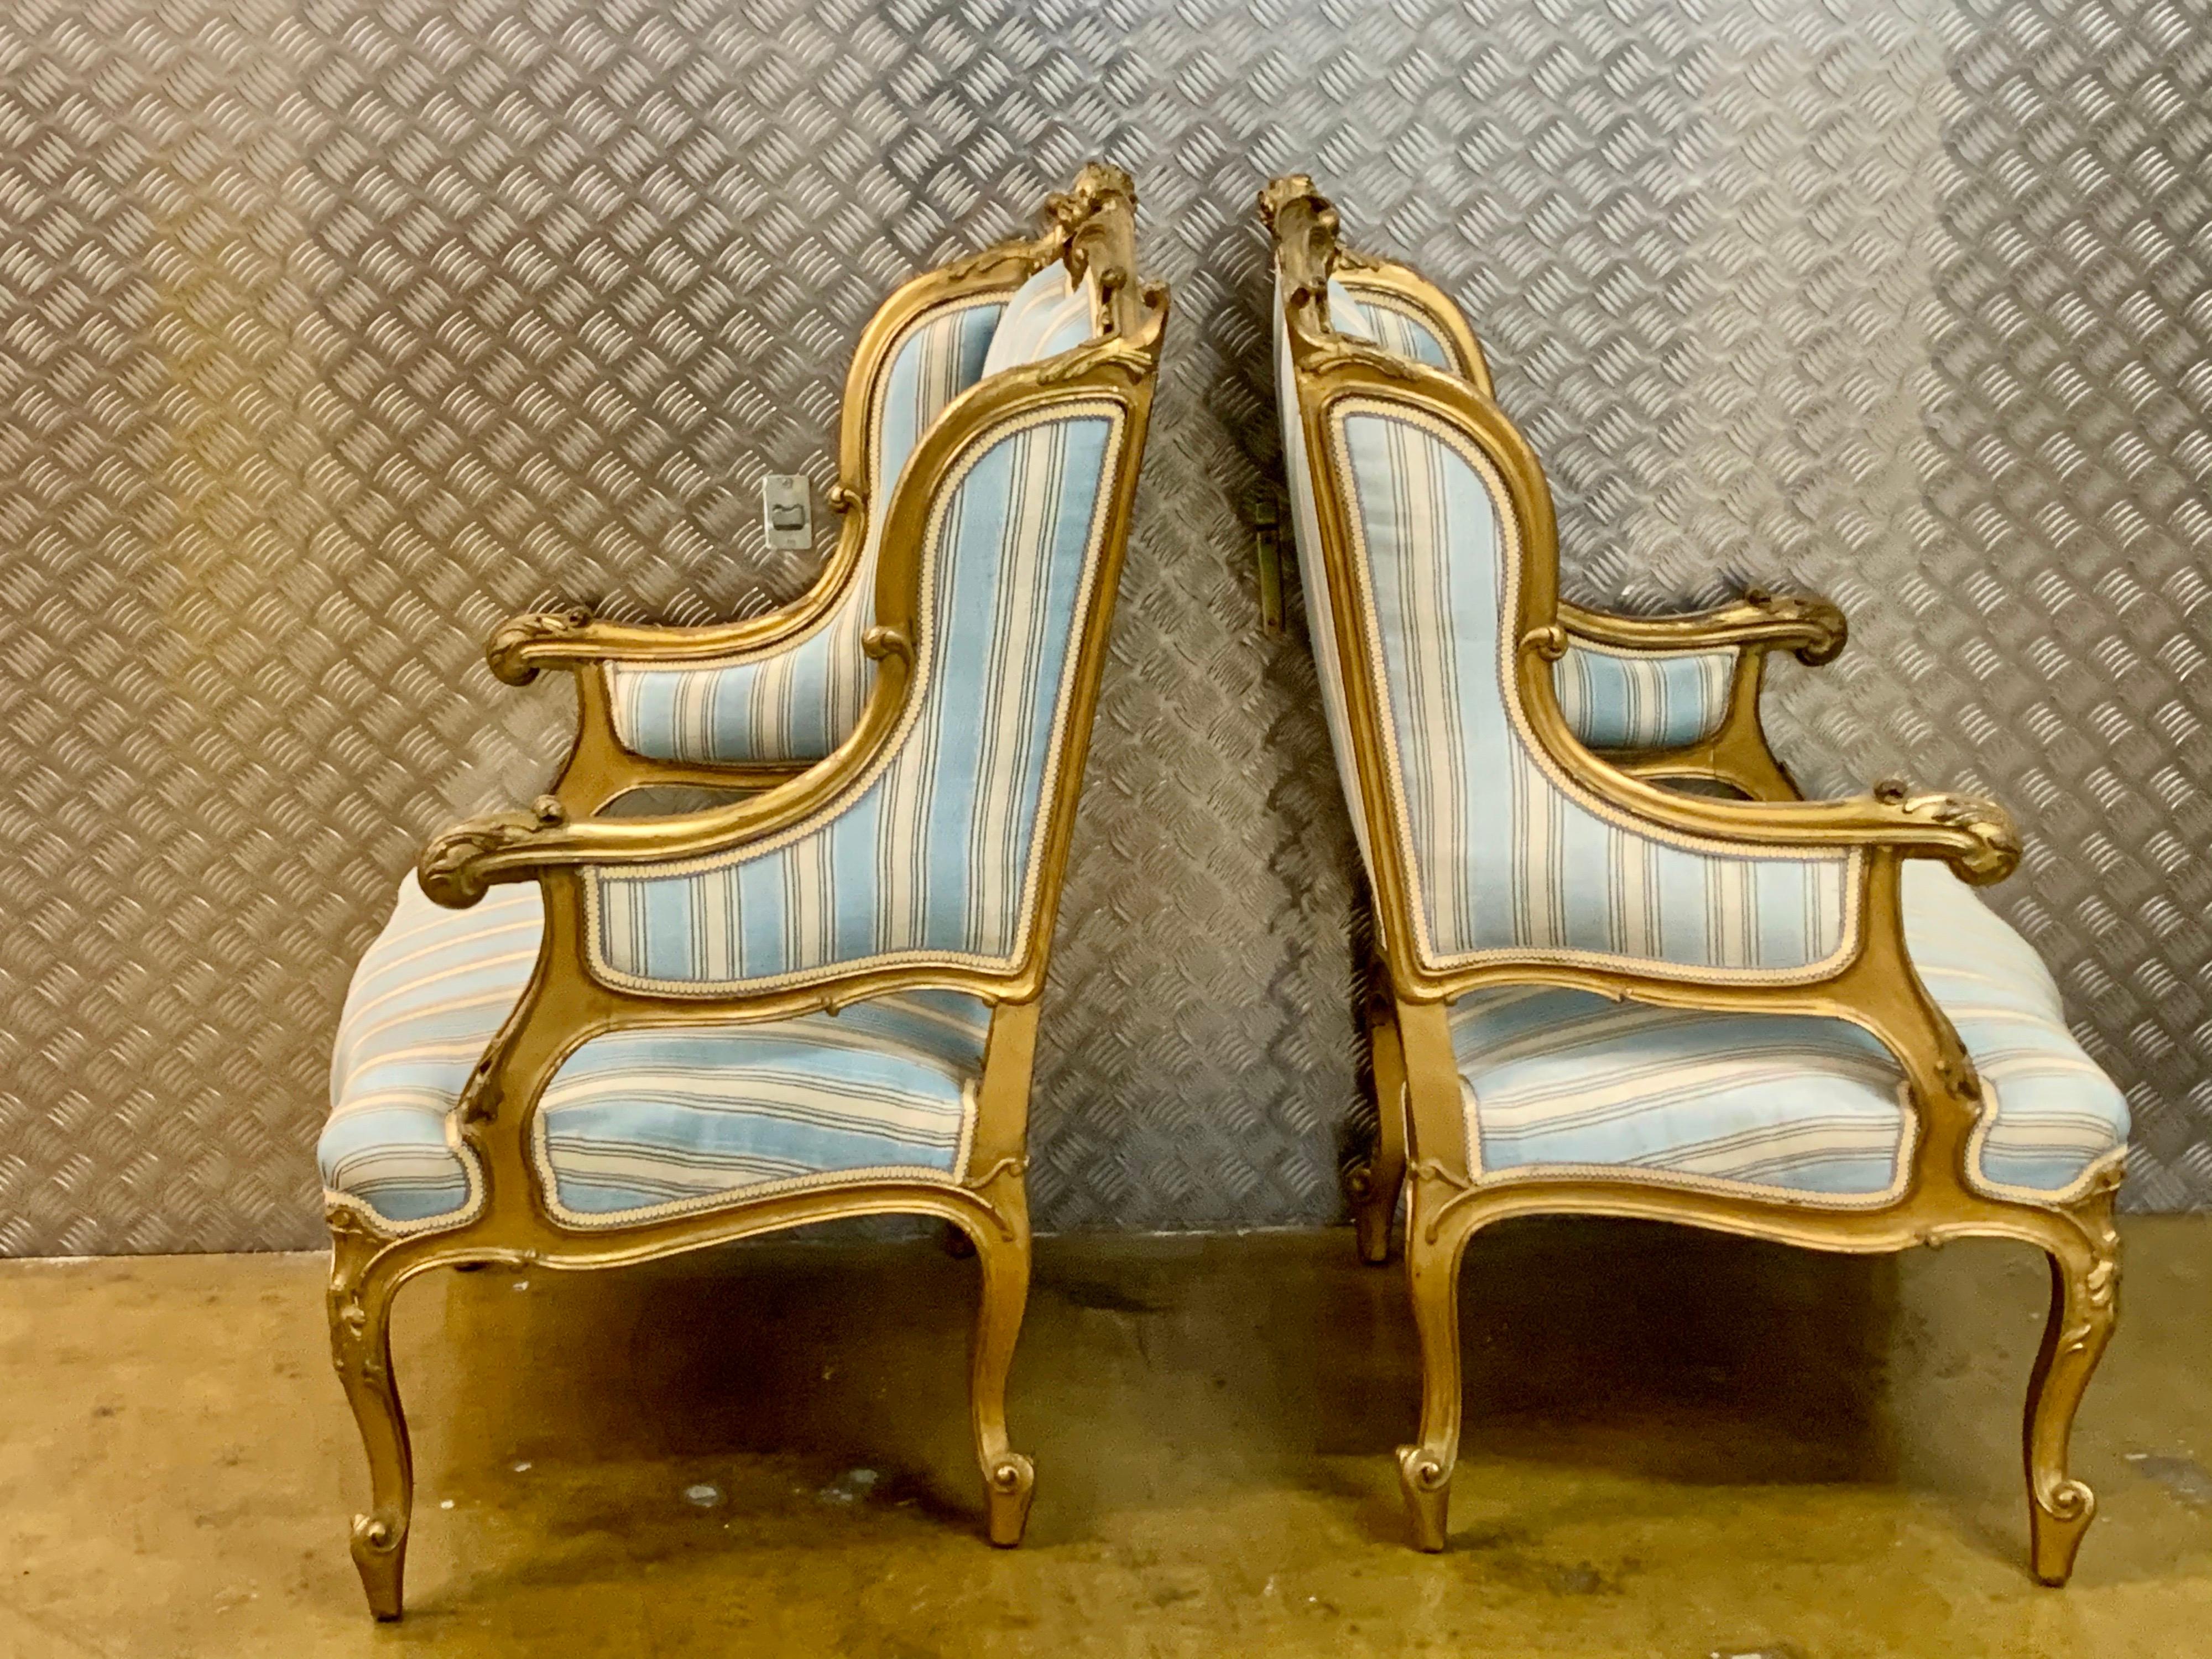 A pair of very nice French upholstered wing back chairs, the gilt frame with scroll carved cresting and acanthus arms, serpentine frieze on cabriole legs, loose seat cushion, Measures: W 76 cm, D 68 cm, H 123cm. 
The condition is very good and they